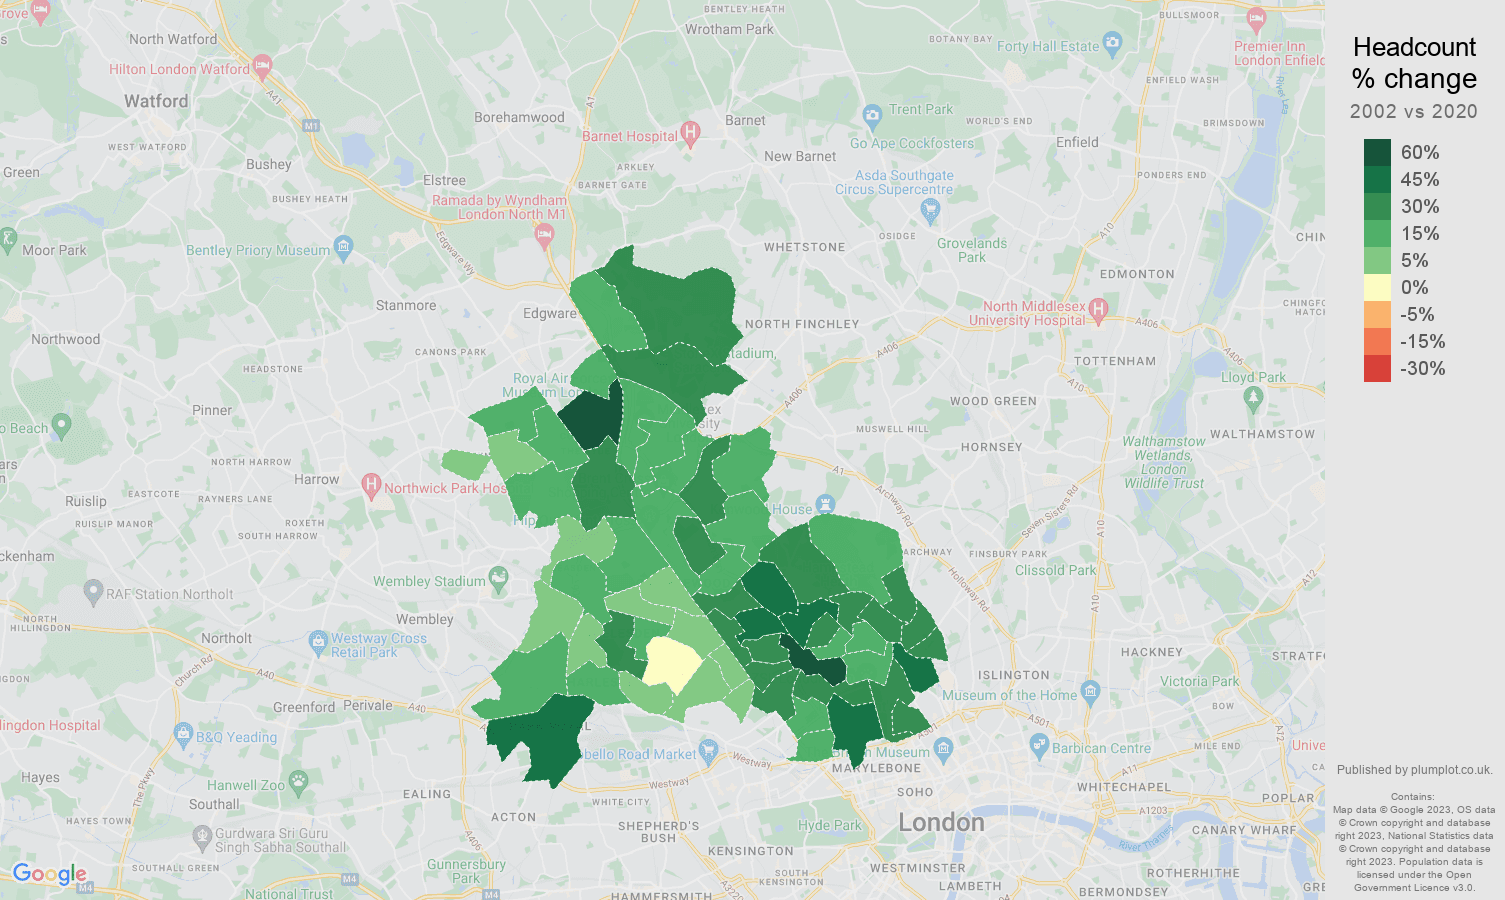 North West London headcount change map